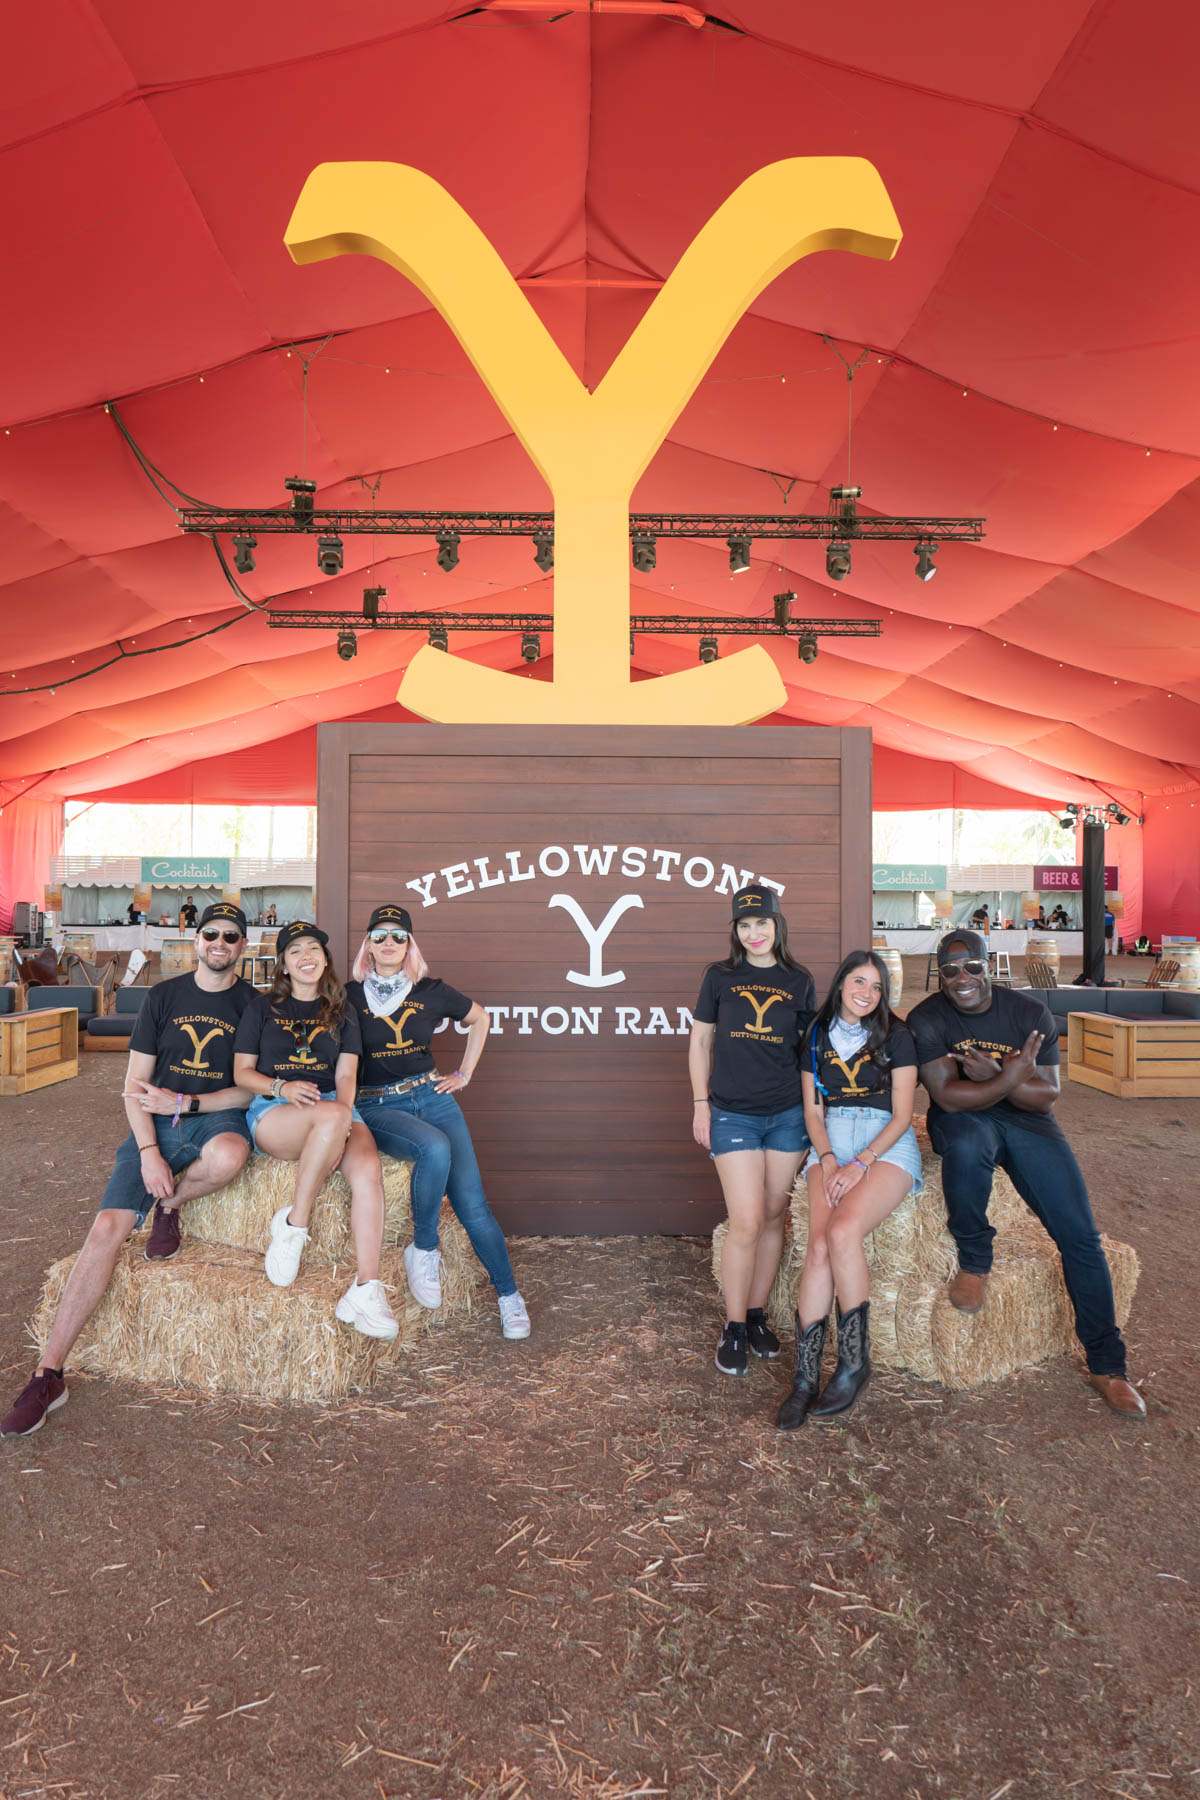 Brand ambassadors posing in front of a giant Yellowstone Y logo.